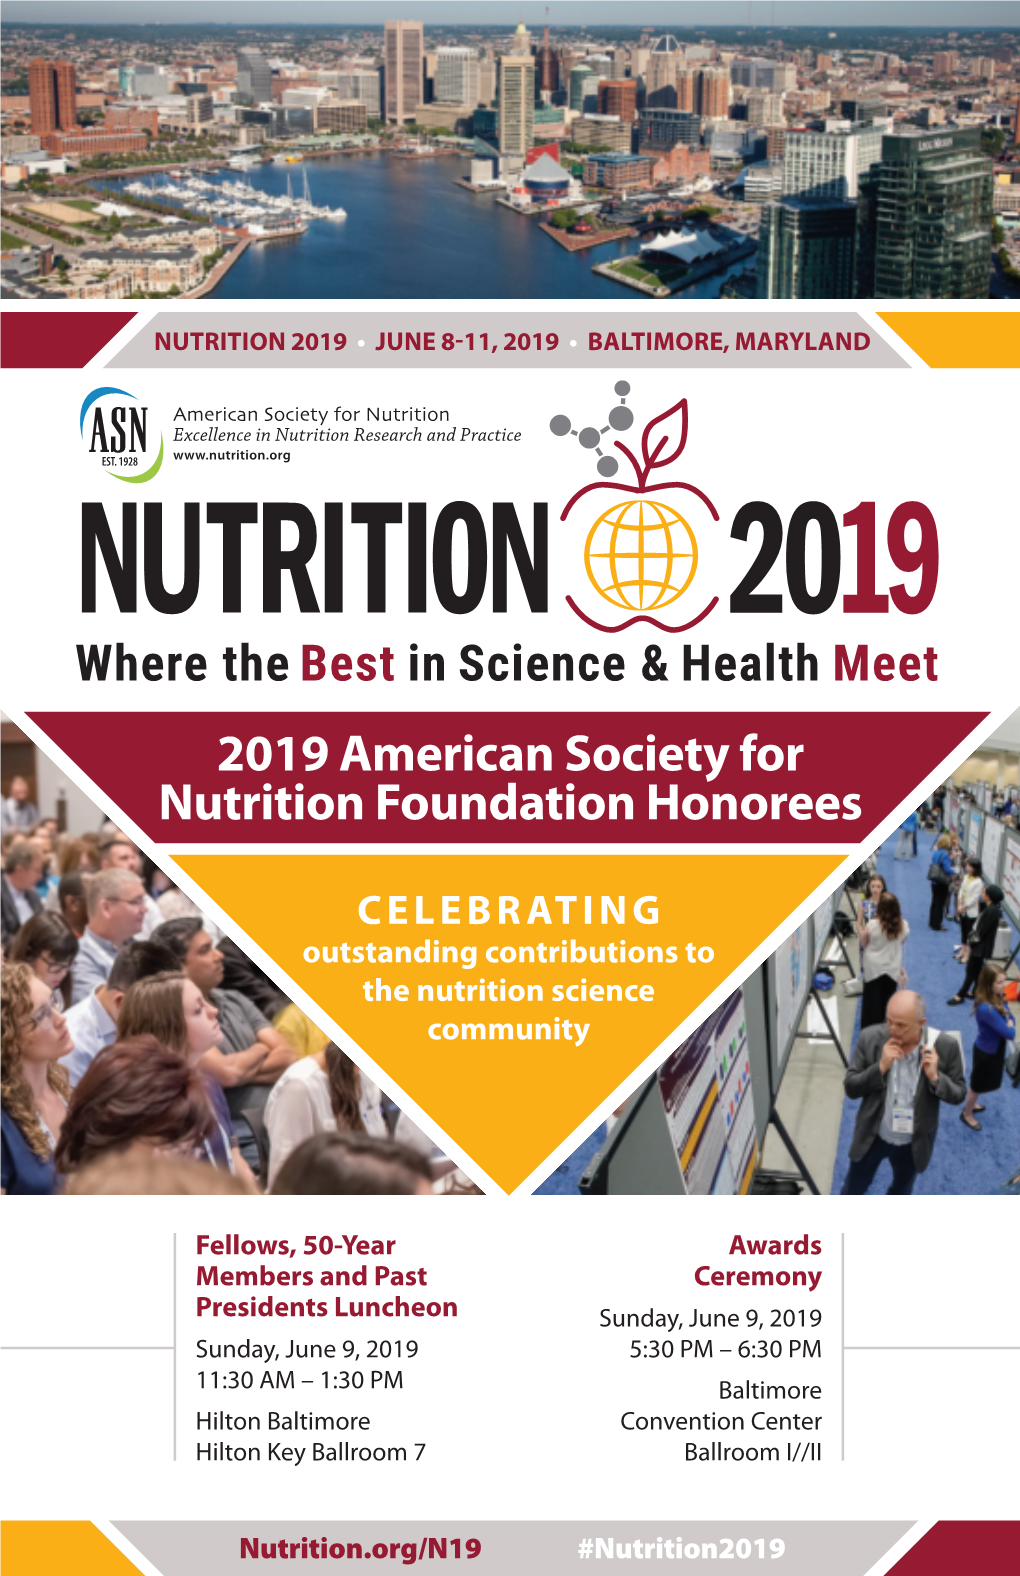 2019 American Society for Nutrition Foundation Honorees